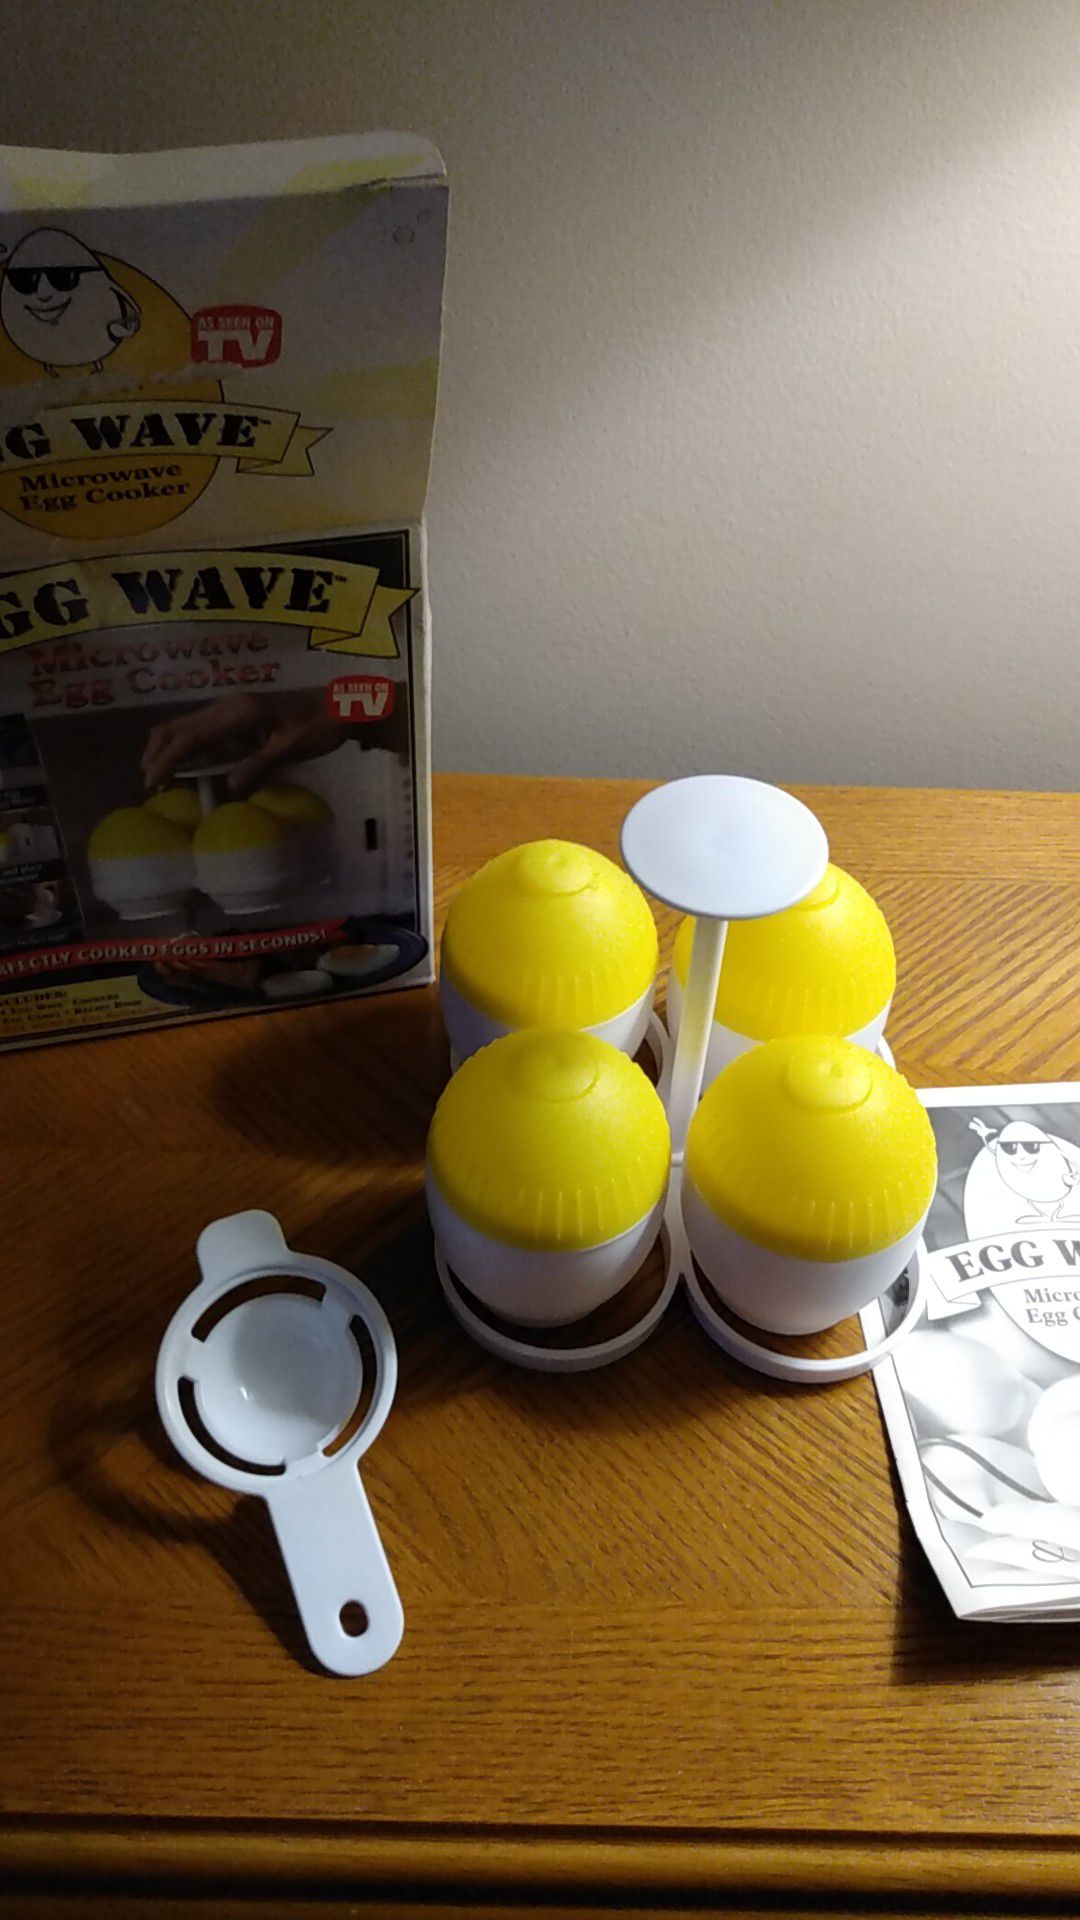 Chefman Egg Cooker for Sale in Dallas, TX - OfferUp